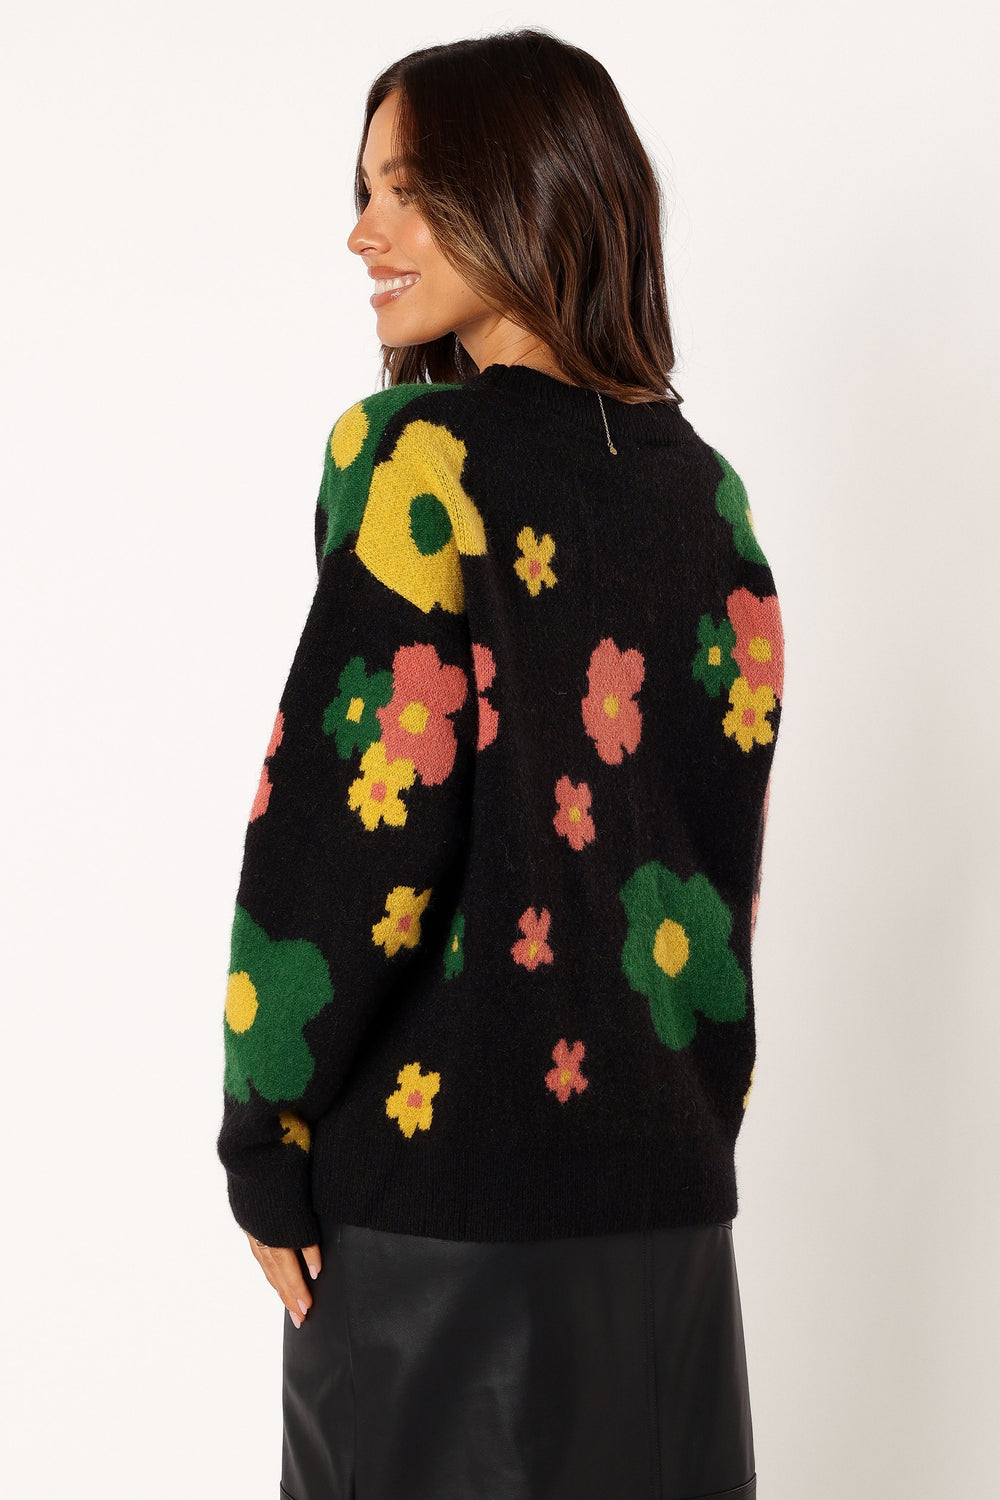 Petal and Pup USA KNITWEAR Lexie Multi Color Flower Knit Sweater - Black Multi